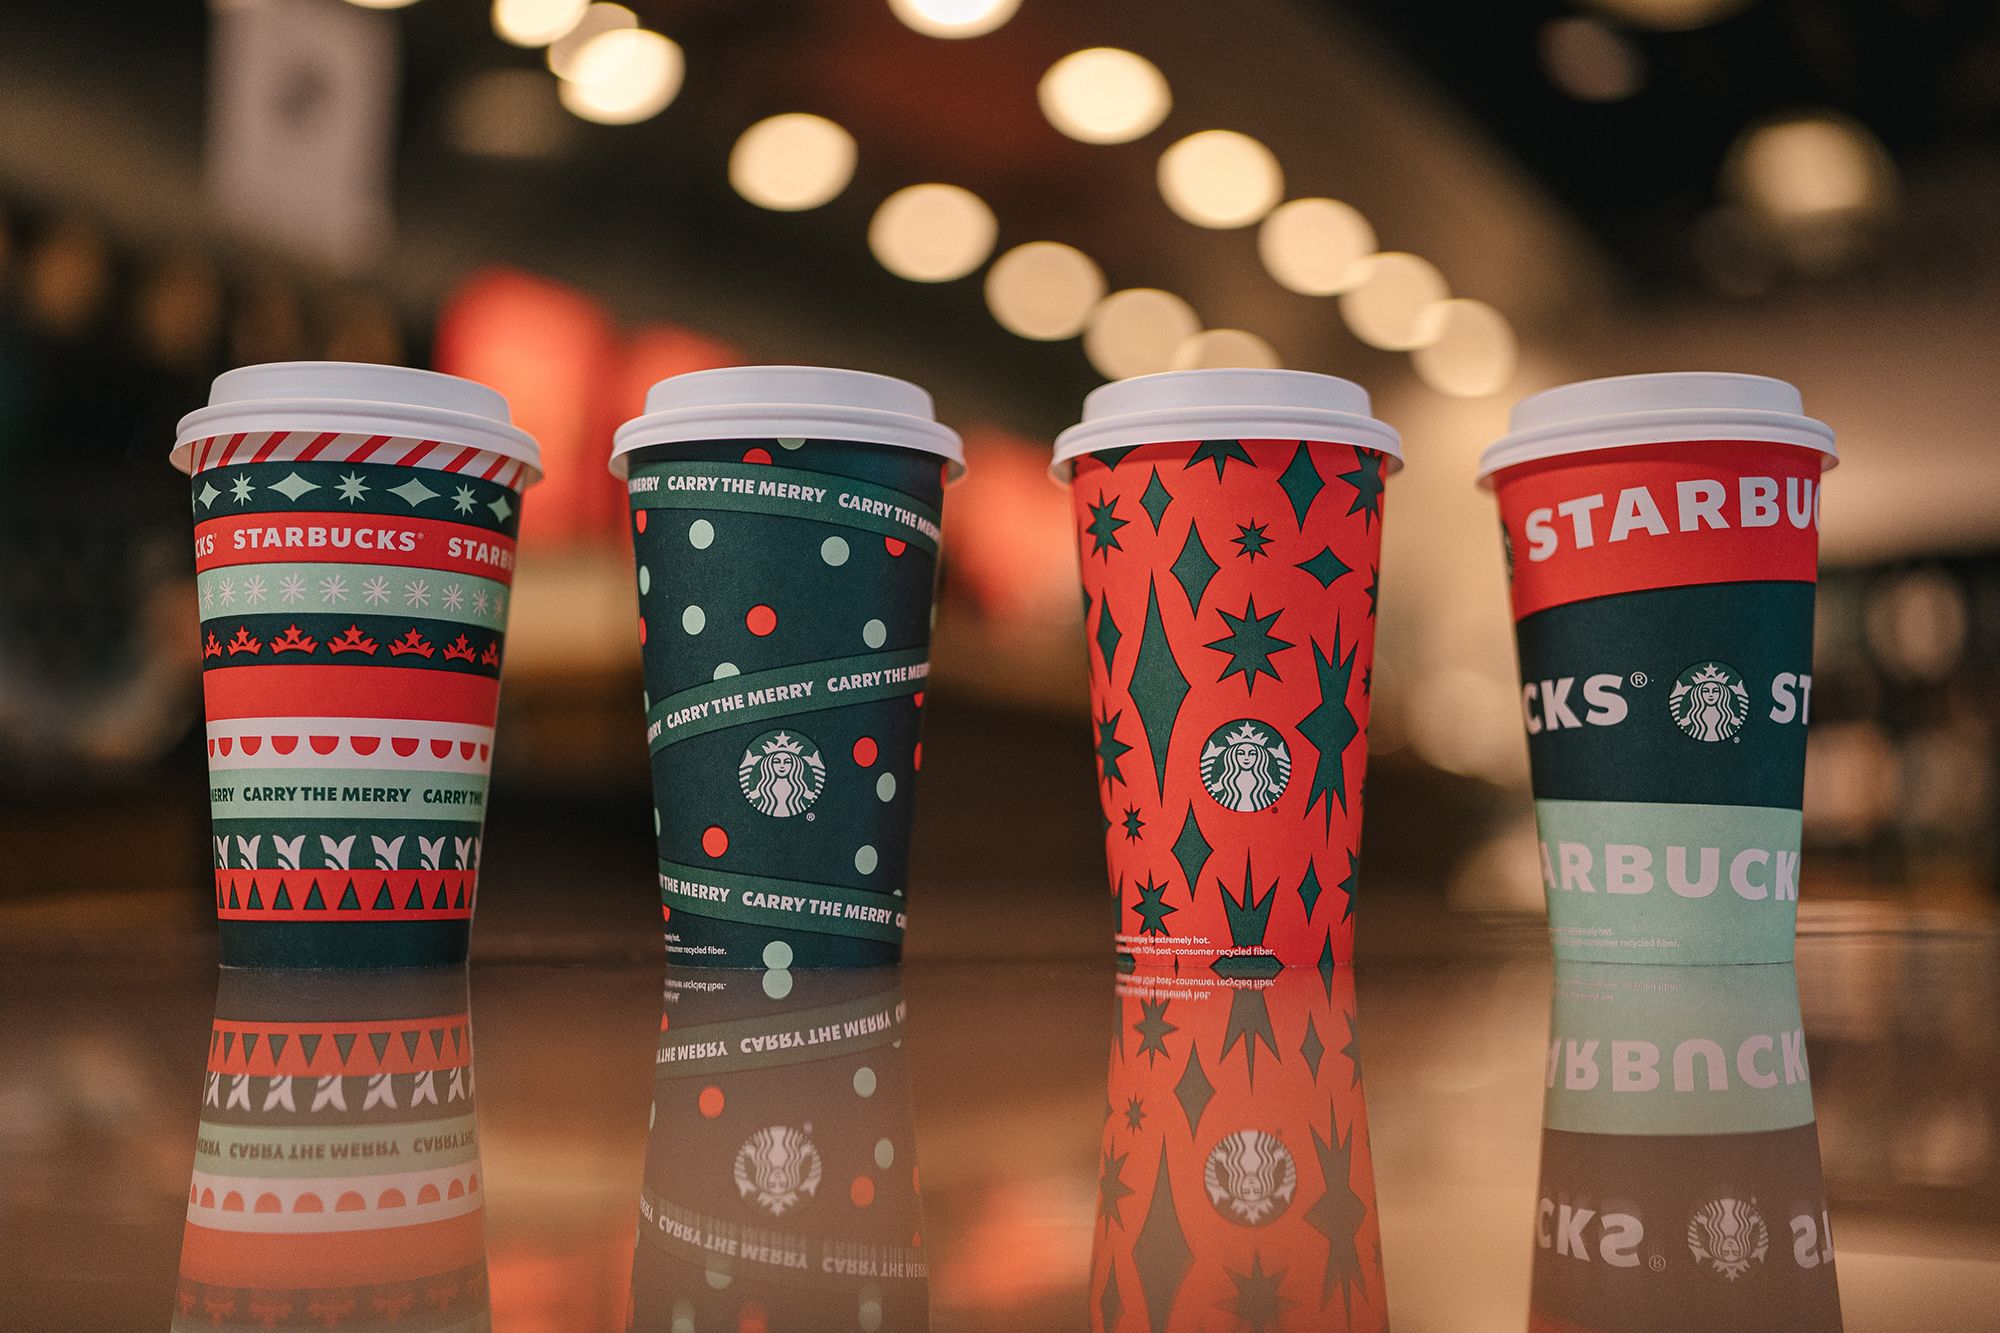 Starbucks dropped their new holiday cups today including a red